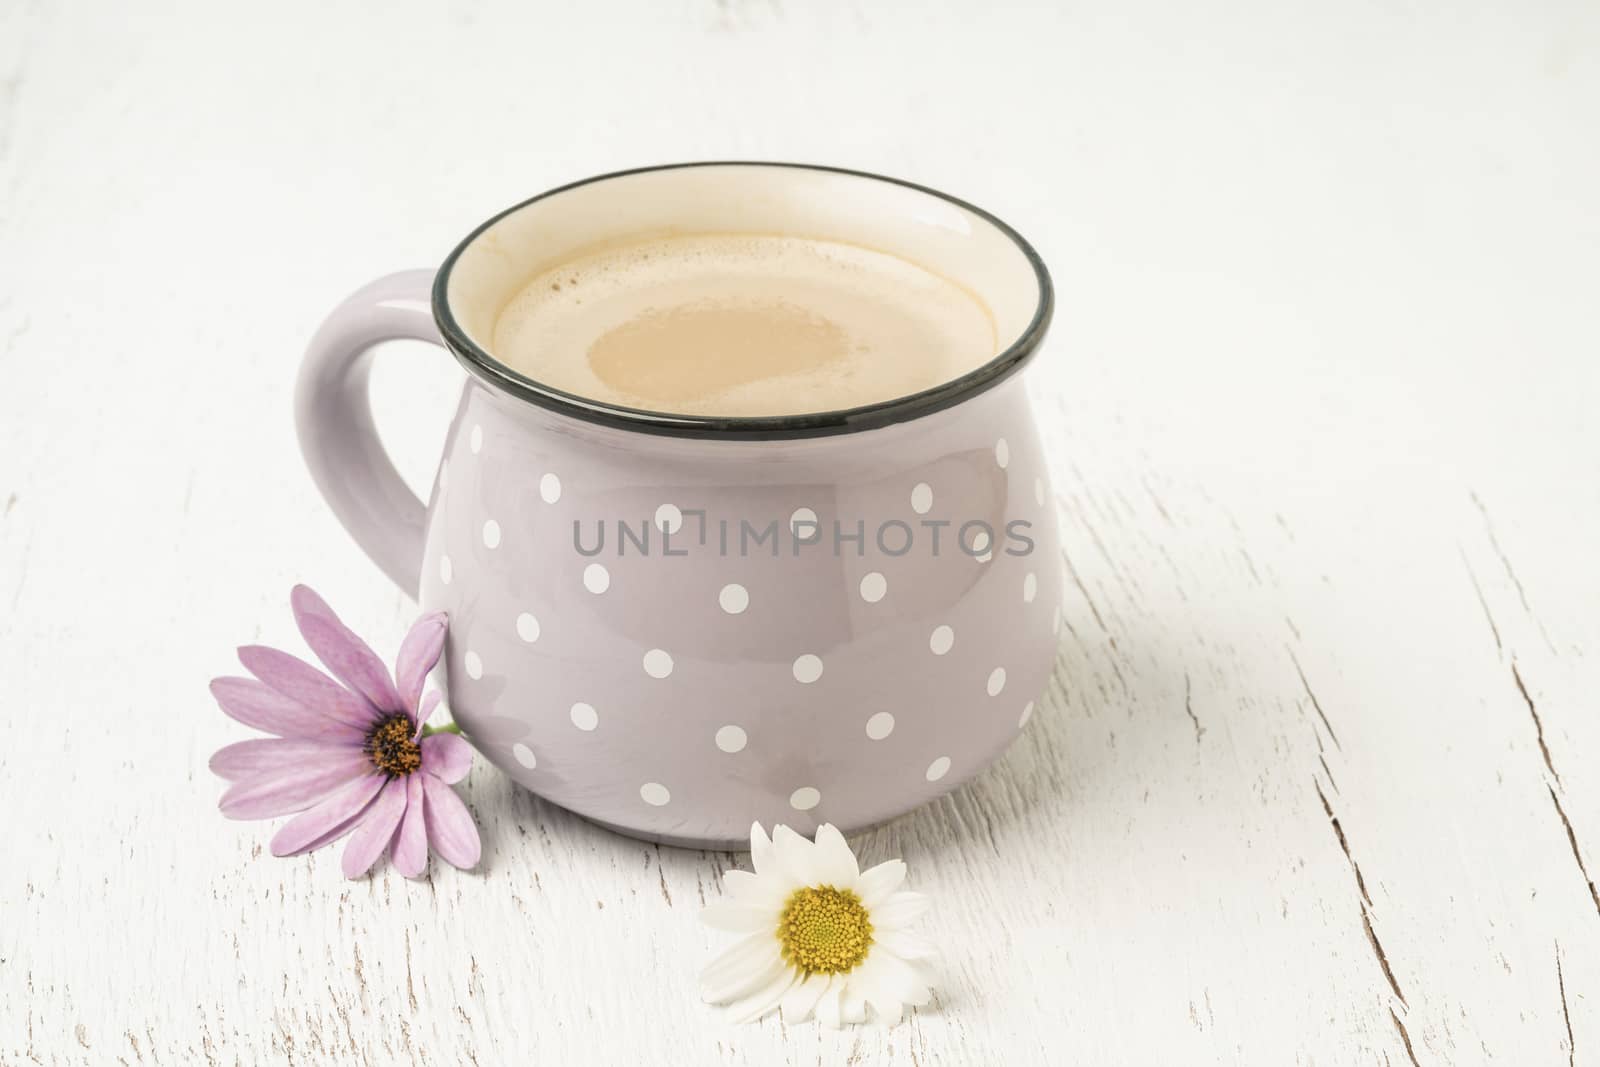 a cup of cappuccino or coffee latte on a wooden table decorated with spring flowers